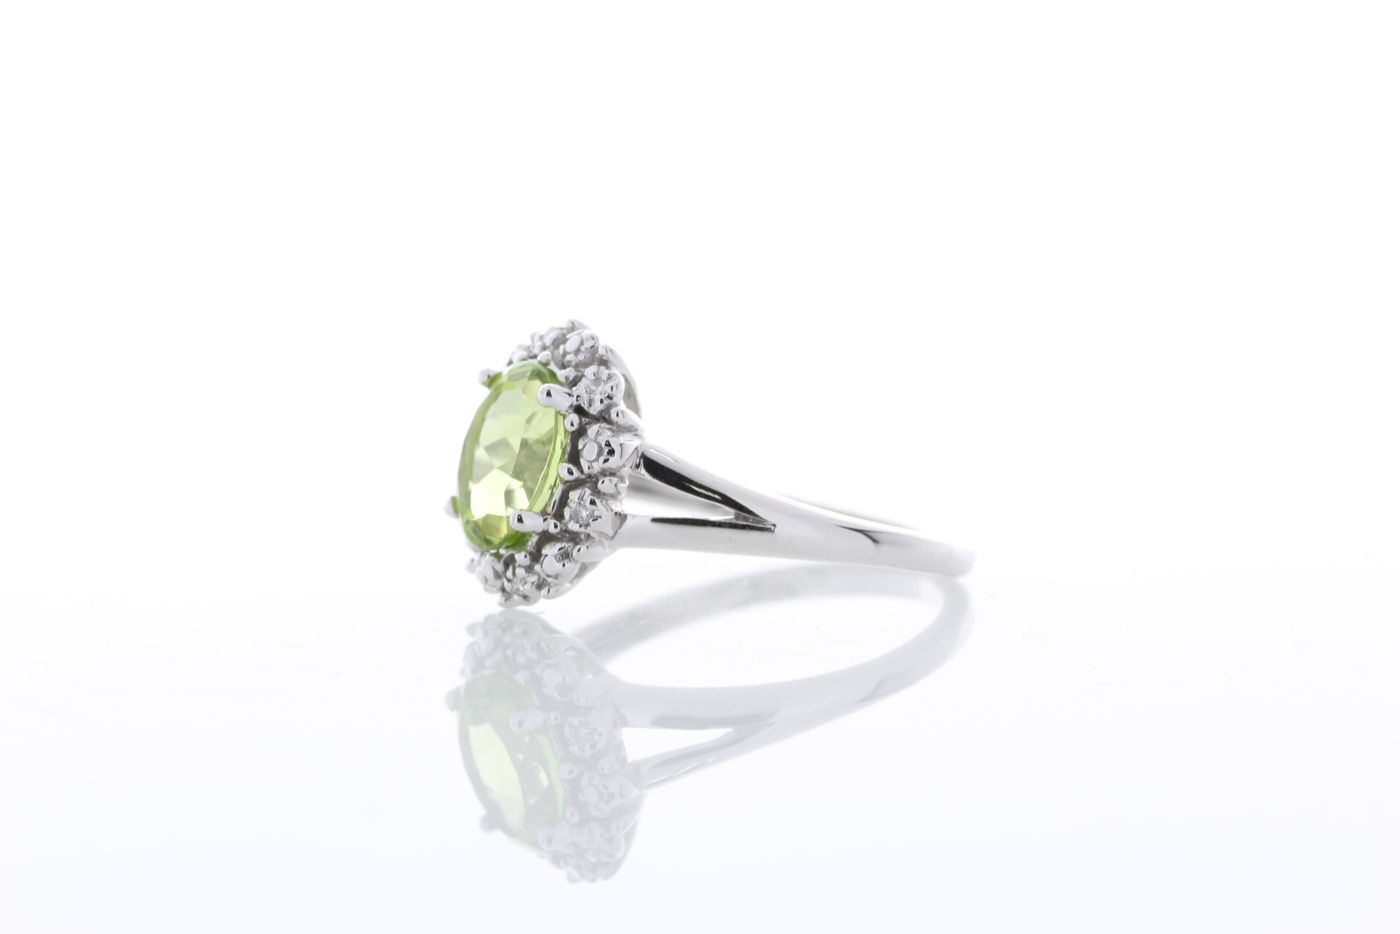 9ct White Gold Cluster Diamond And Peridot Ring 1.40 Carats - Image 2 of 7